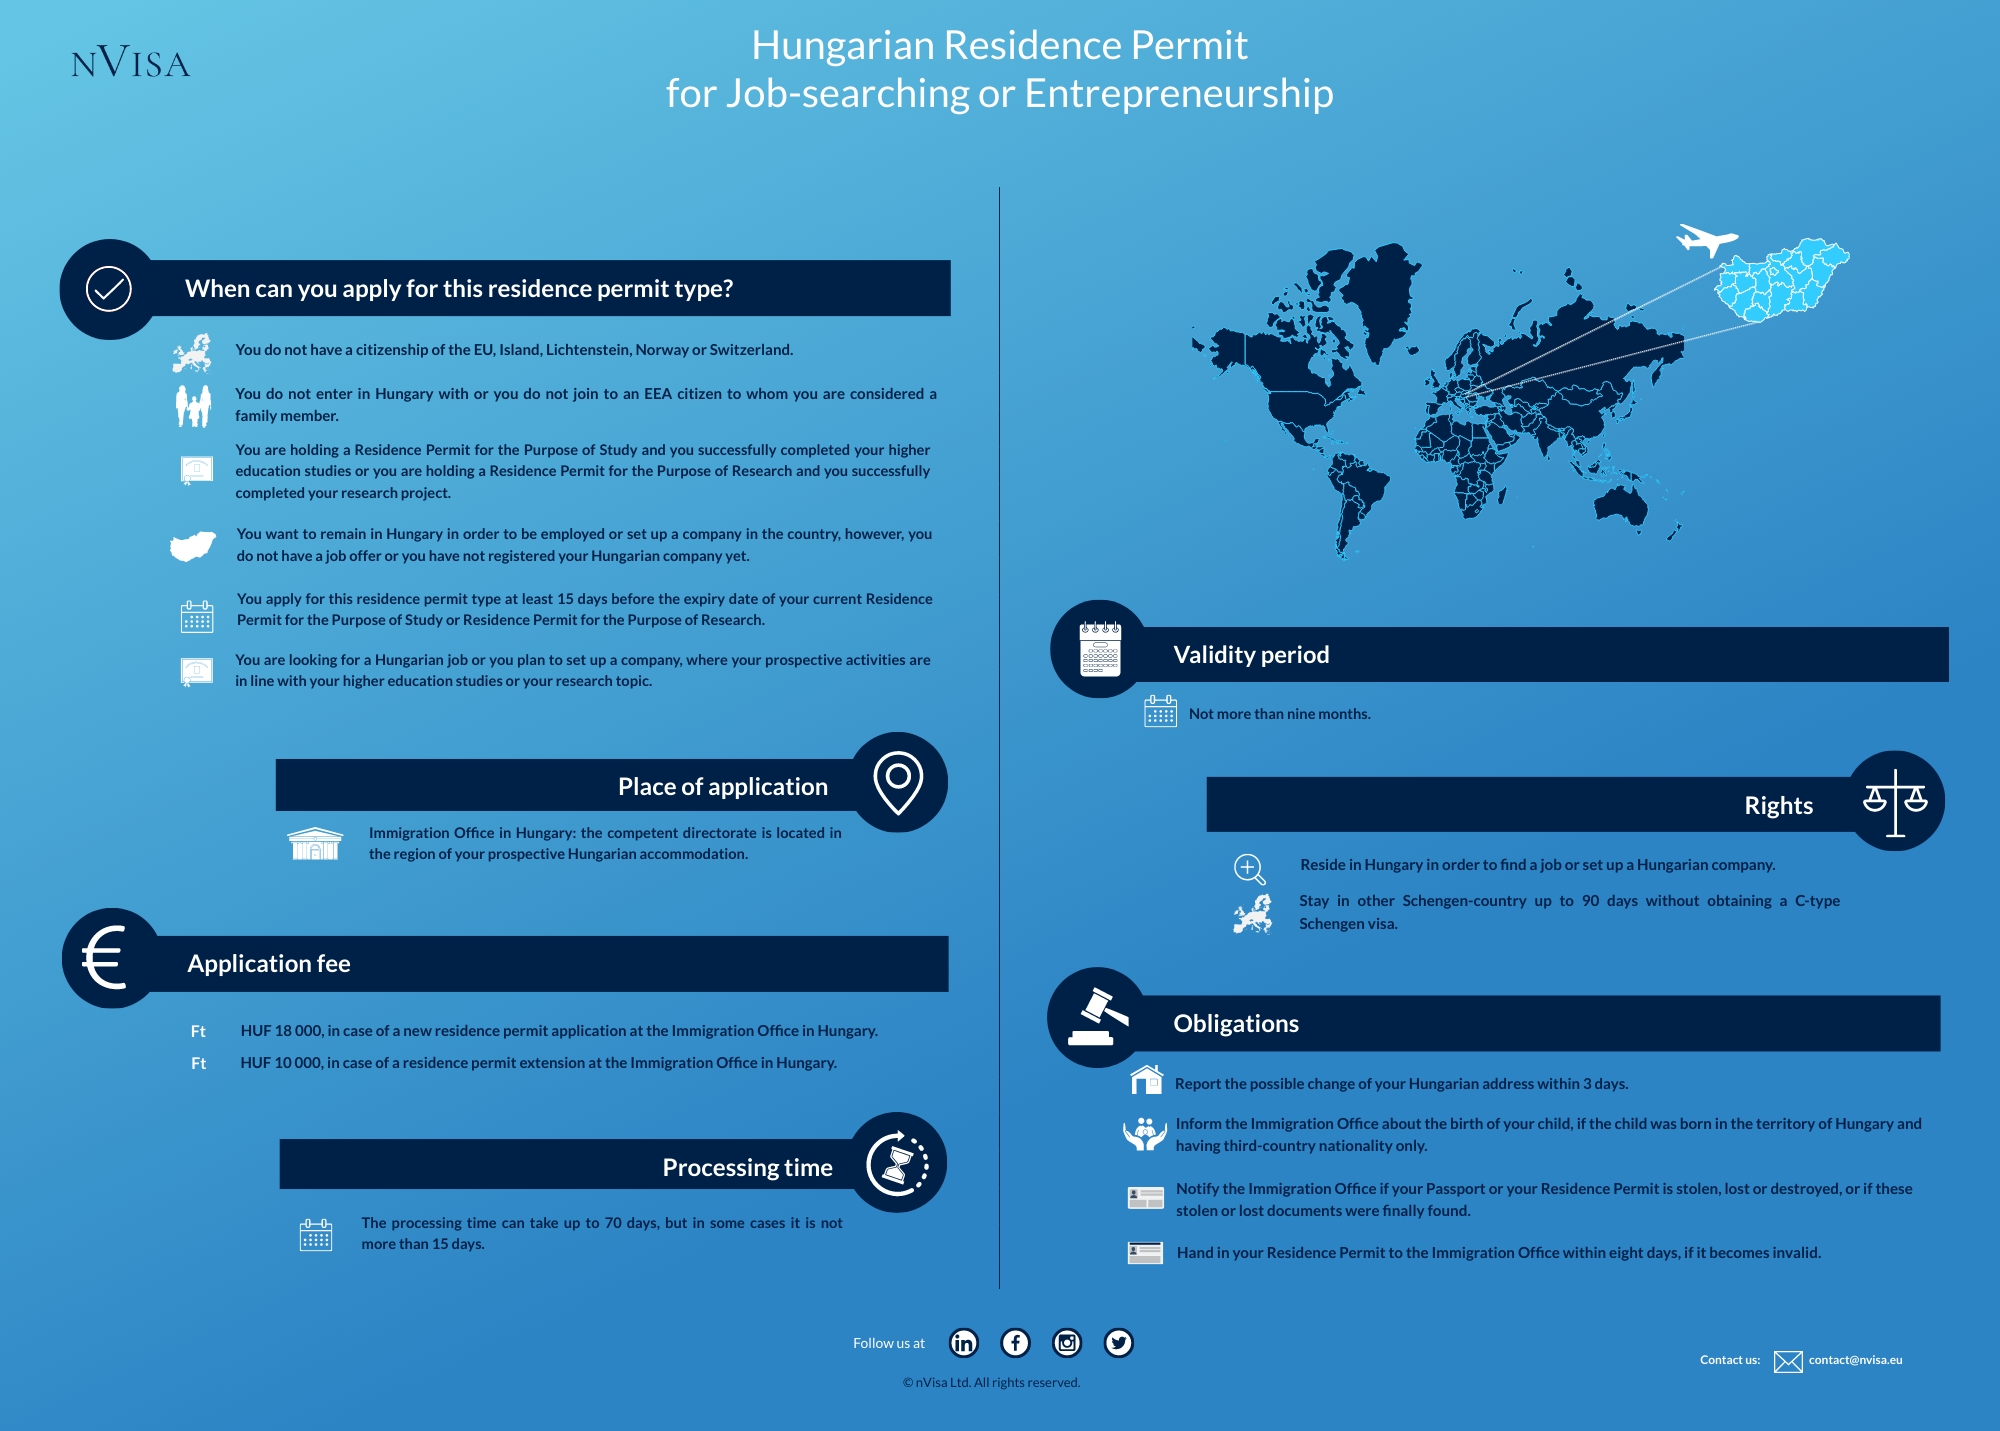 Infographic about immigration requirements and the details of obtaining a Residence Permit for the Purpose of Job-searching or Entrepreneurship in Hungary.